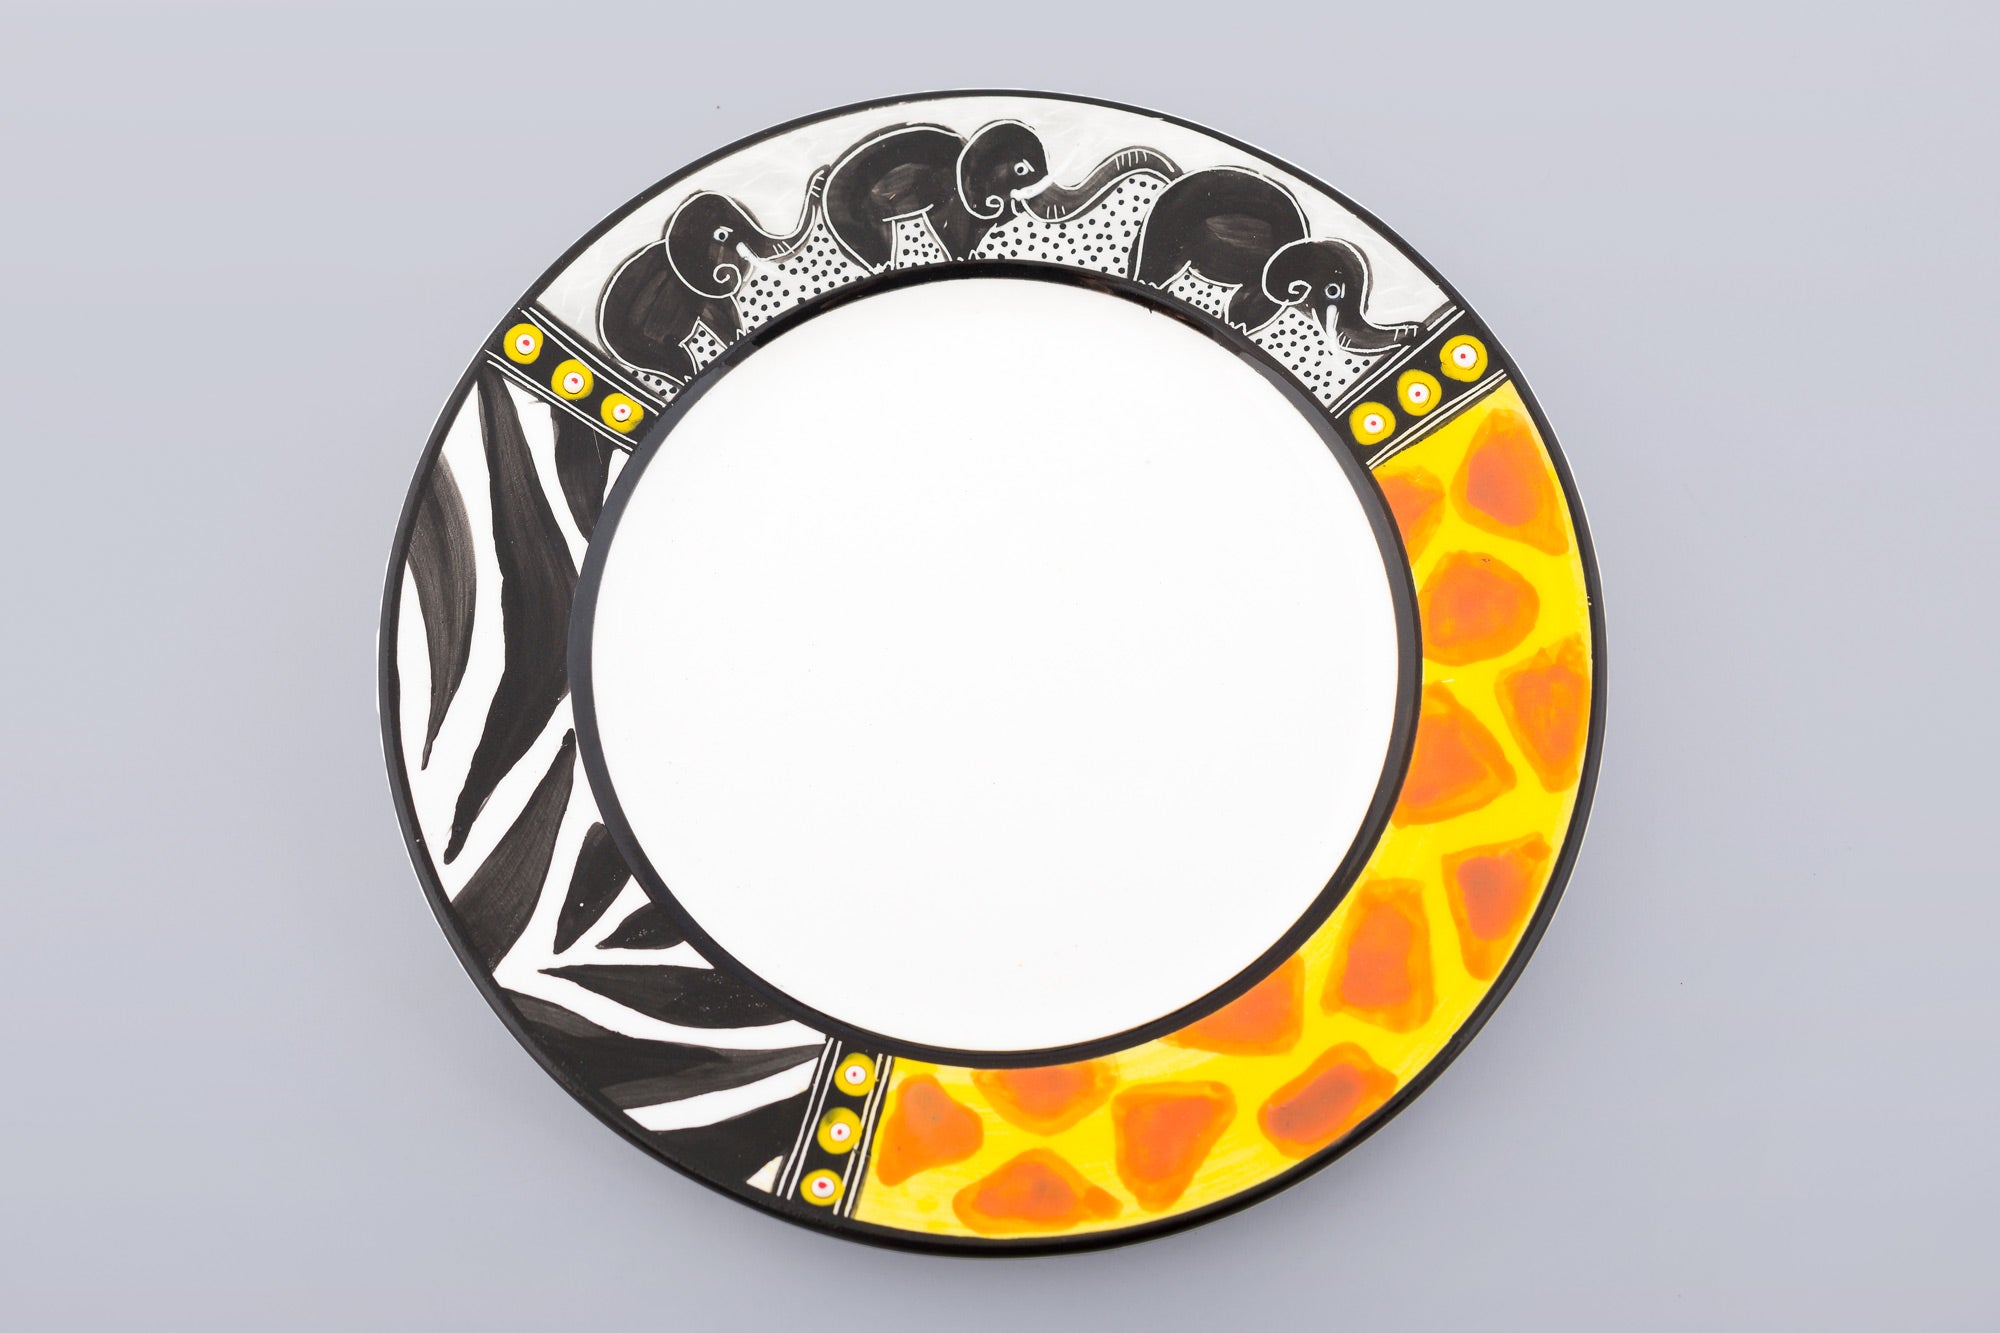 Whimsy Animal print side plate on grey background. White plate with the rim painted in zebra & giraffe print and three small elephants in a line - trunks up for Good Luck!